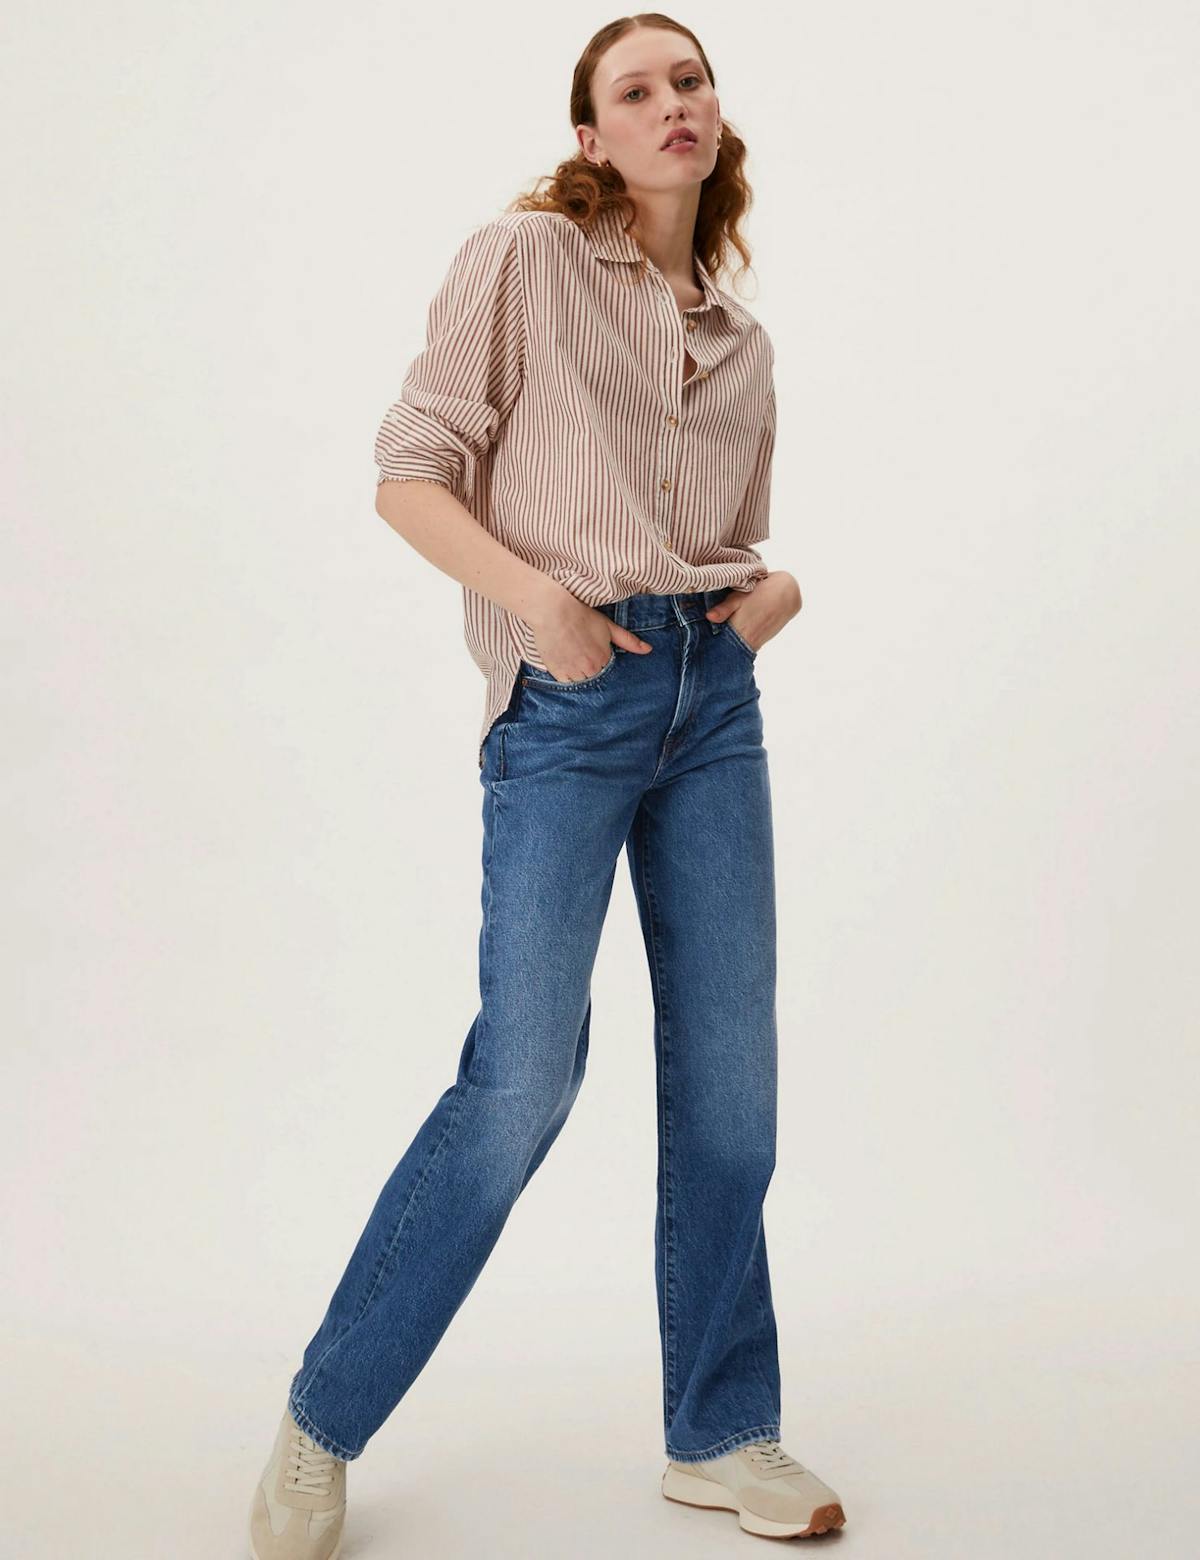 Best jeans for women: 16 comfortable pieces from Marks & Spencer